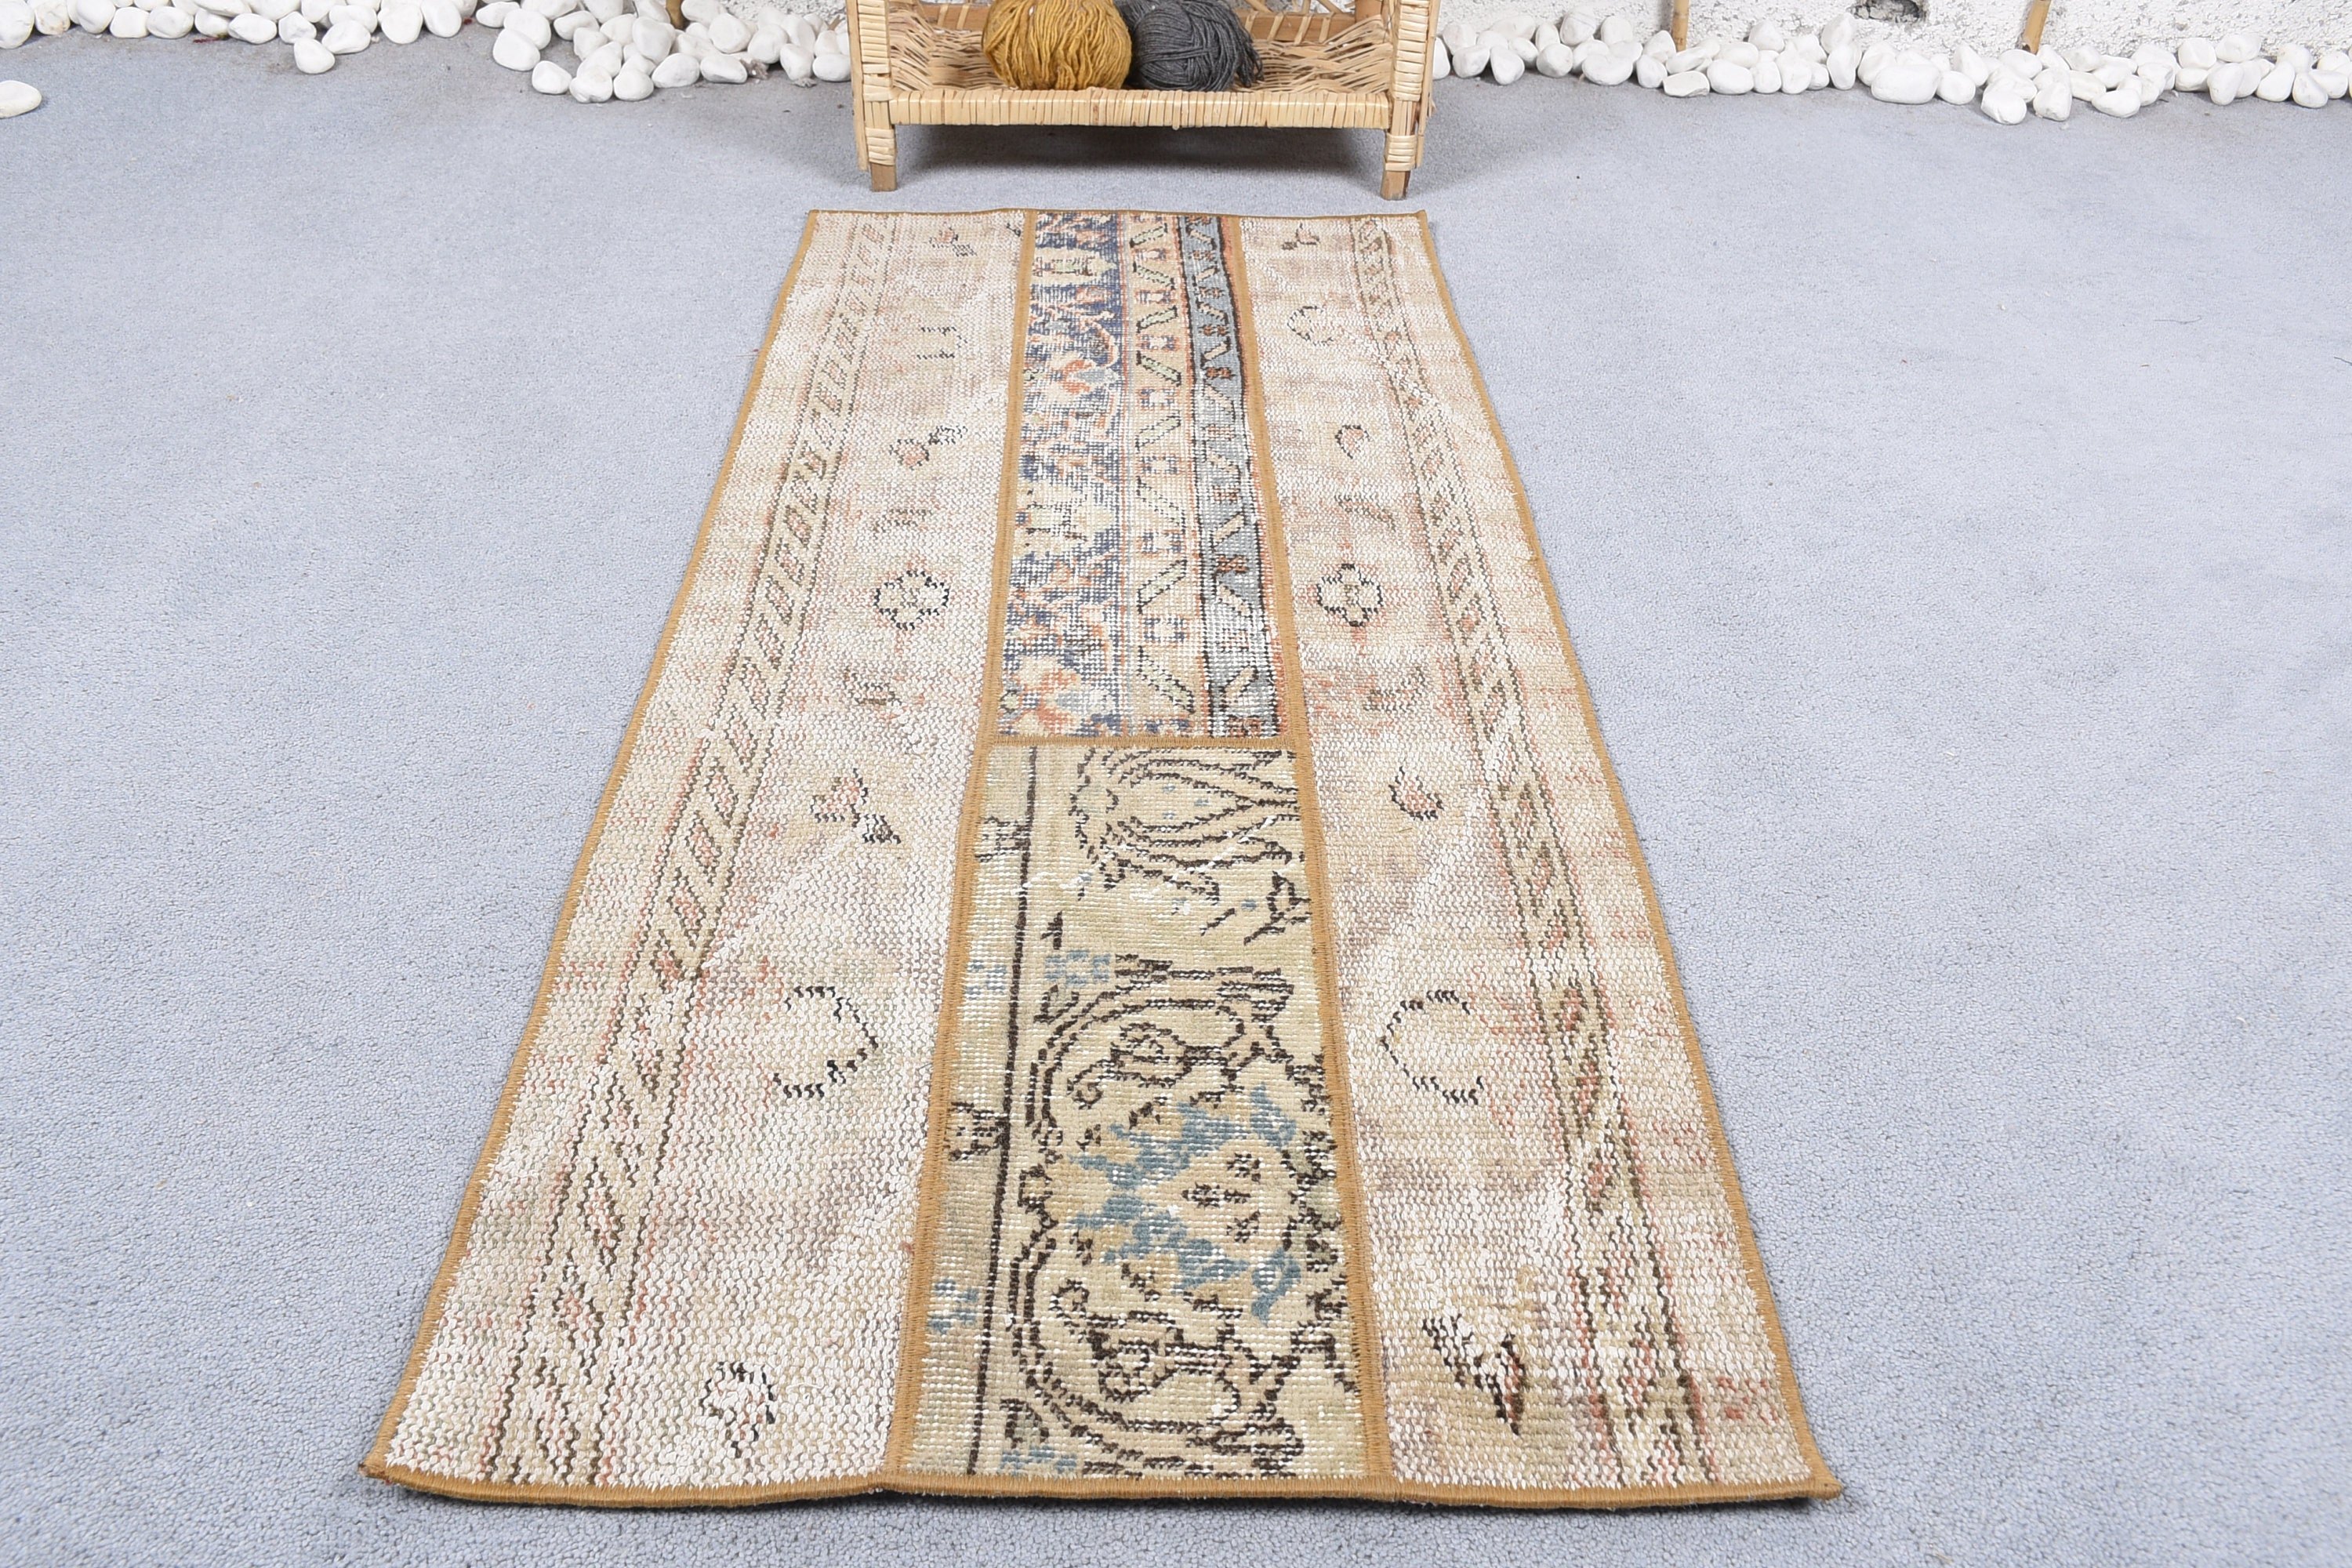 Turkish Rugs, Entry Rugs, Car Mat Rugs, 1.8x3.3 ft Small Rug, Rugs for Kitchen, Anatolian Rug, Wool Rugs, Vintage Rug, Blue Antique Rug